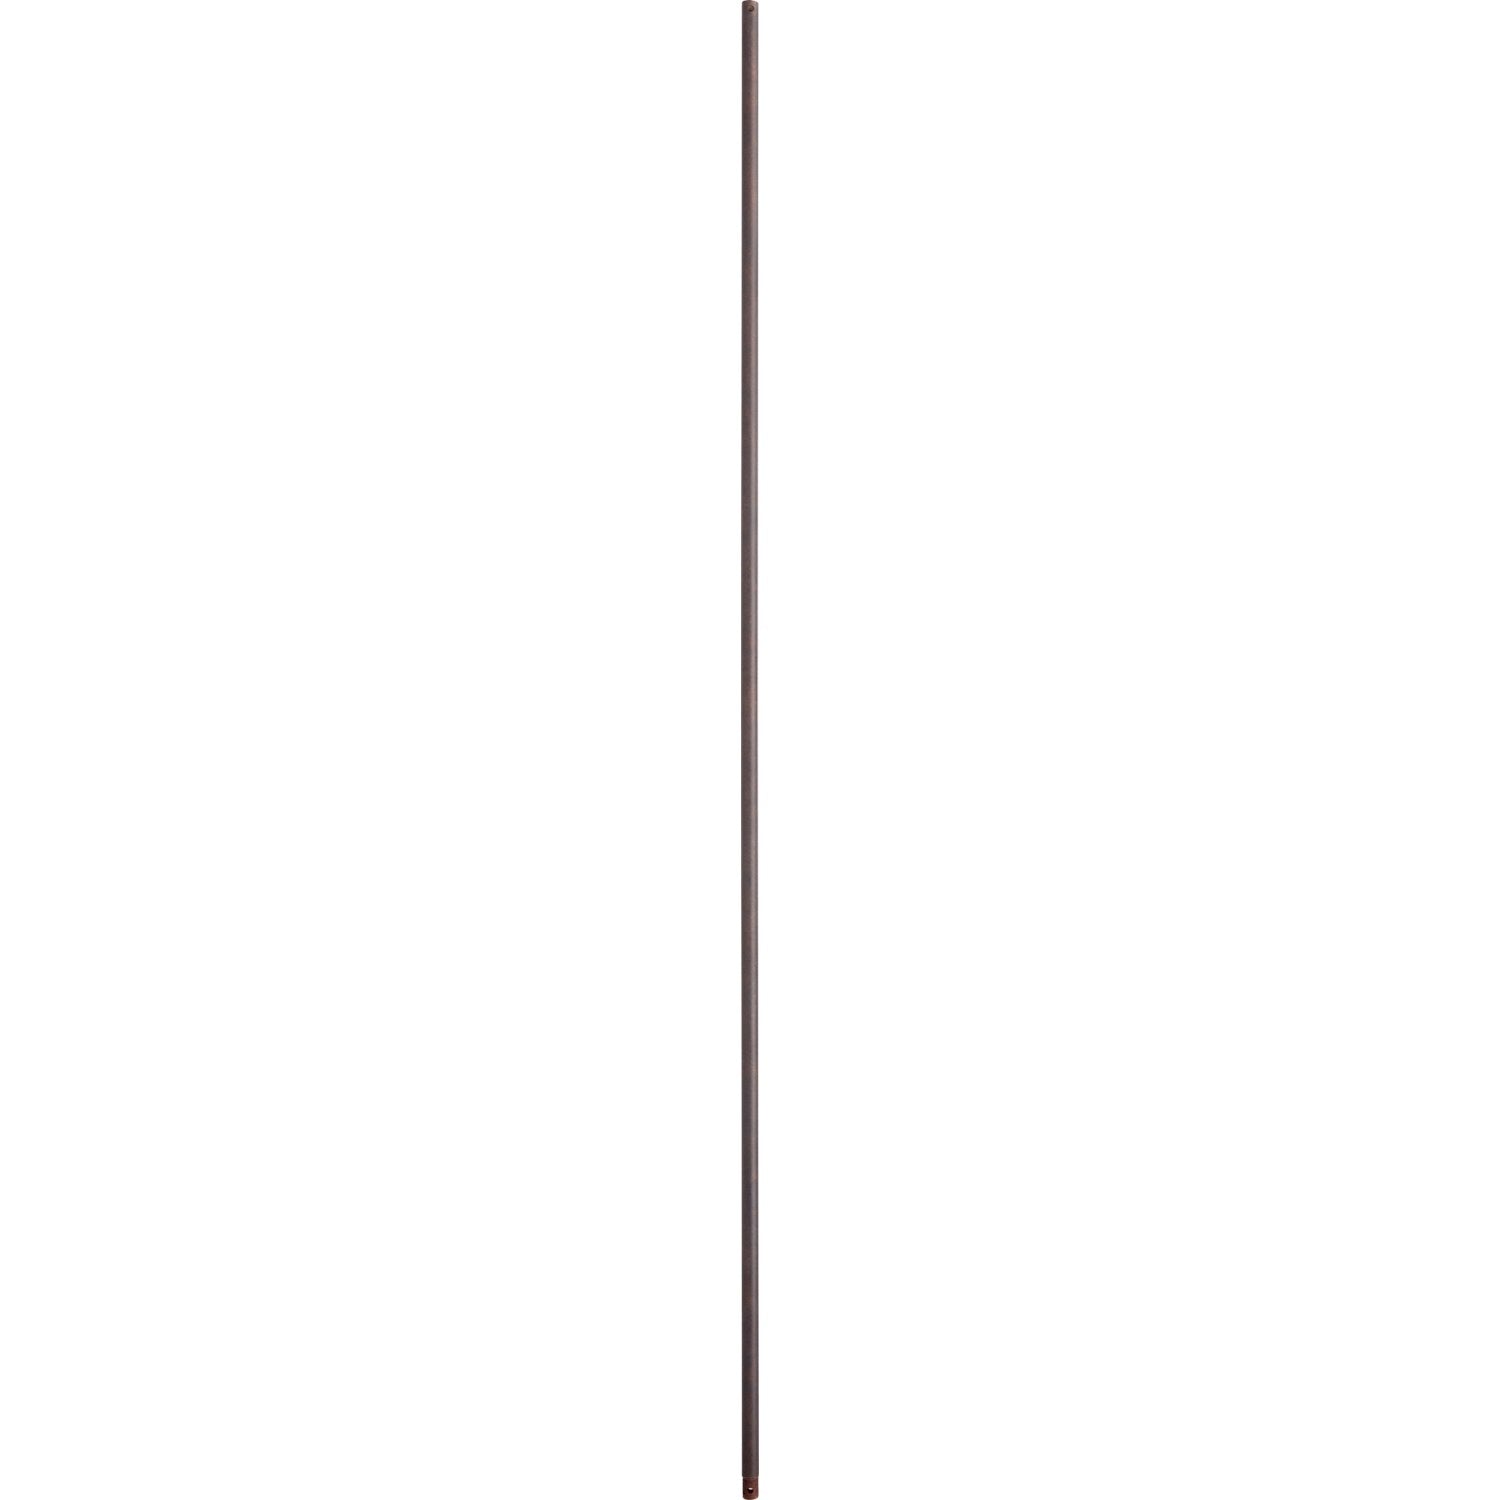 Quorum - 6-7244 - 72" Universal Downrod - 72 in. Downrods - Toasted Sienna